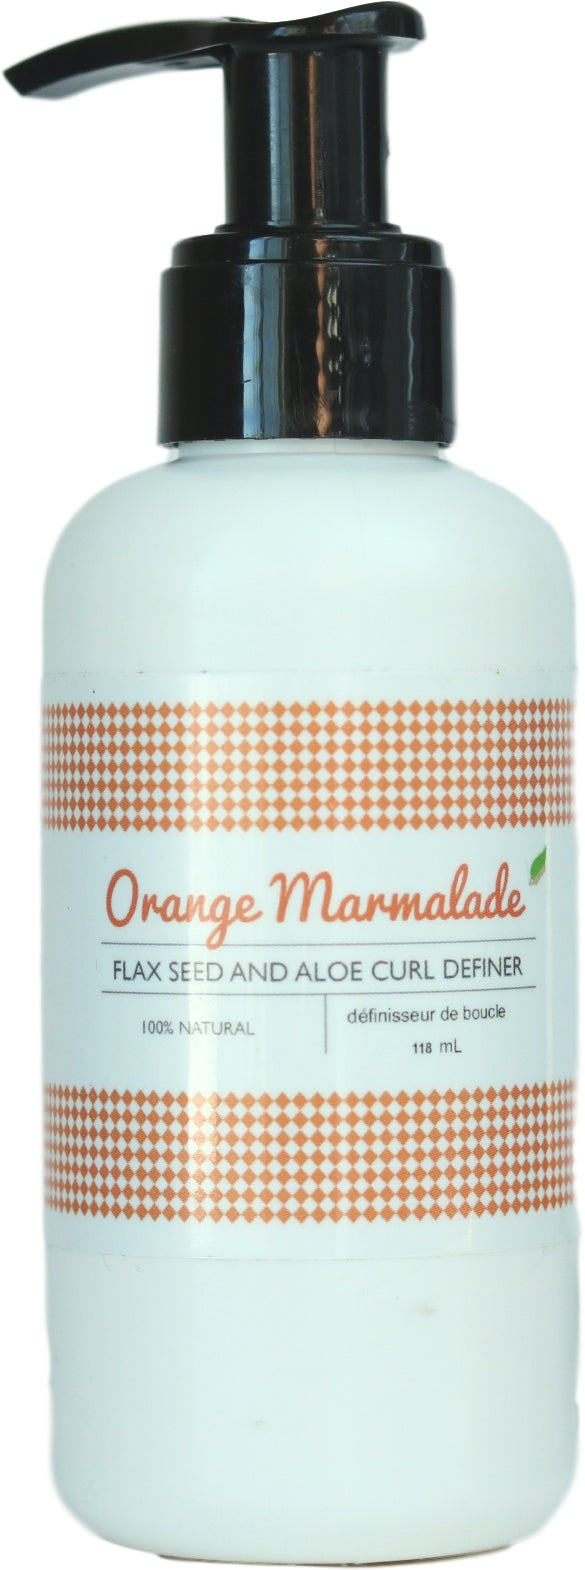 Ecoslay Orange Marmalade (Trial Size) - Shop Now at Curl Warehouse